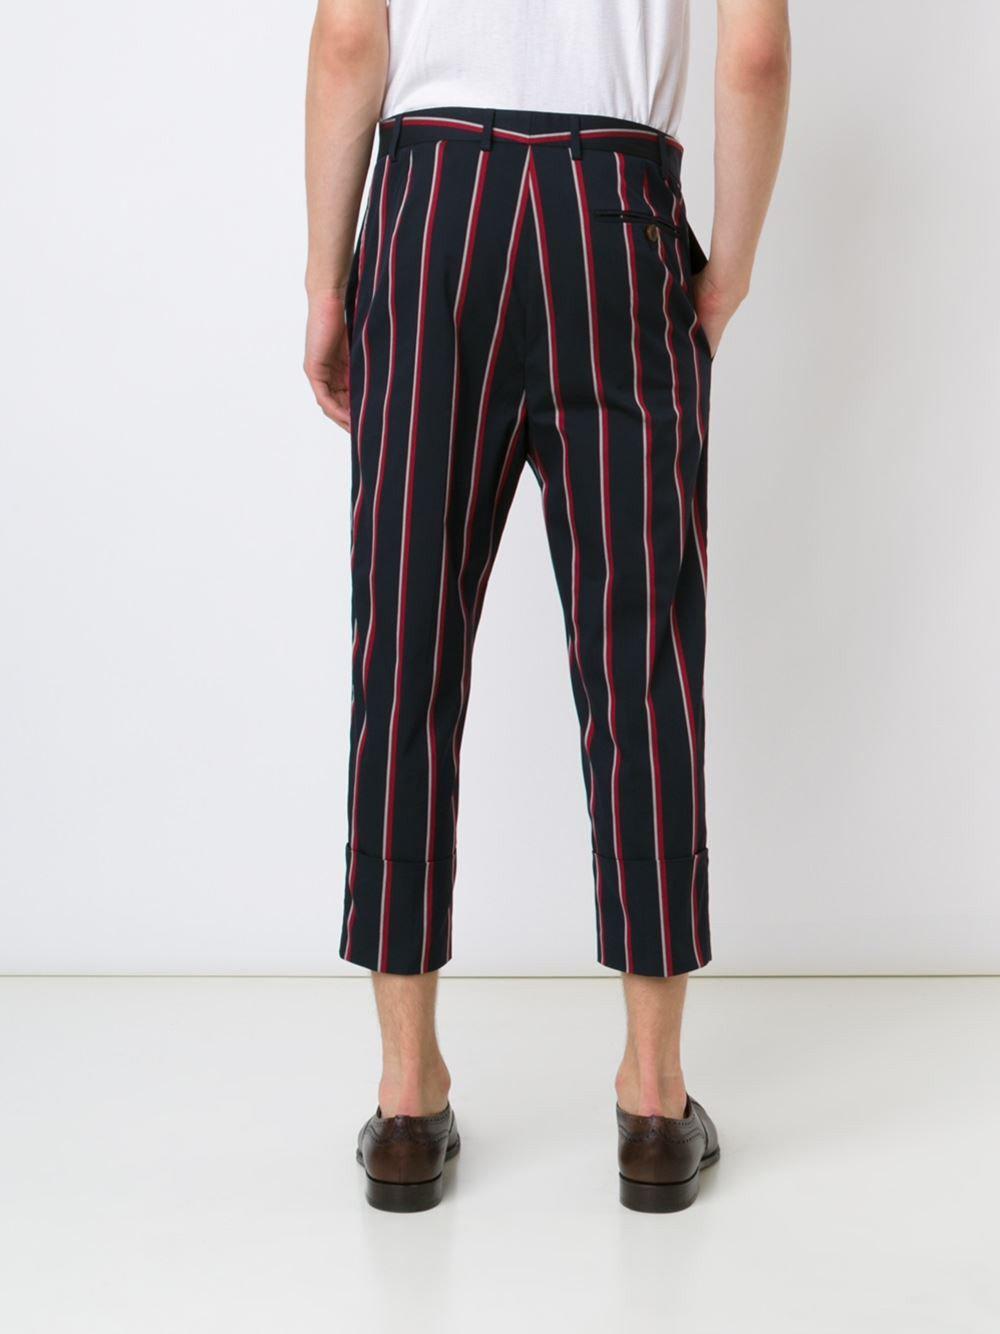 Lyst - Vivienne Westwood Striped Cropped Trousers in Blue for Men